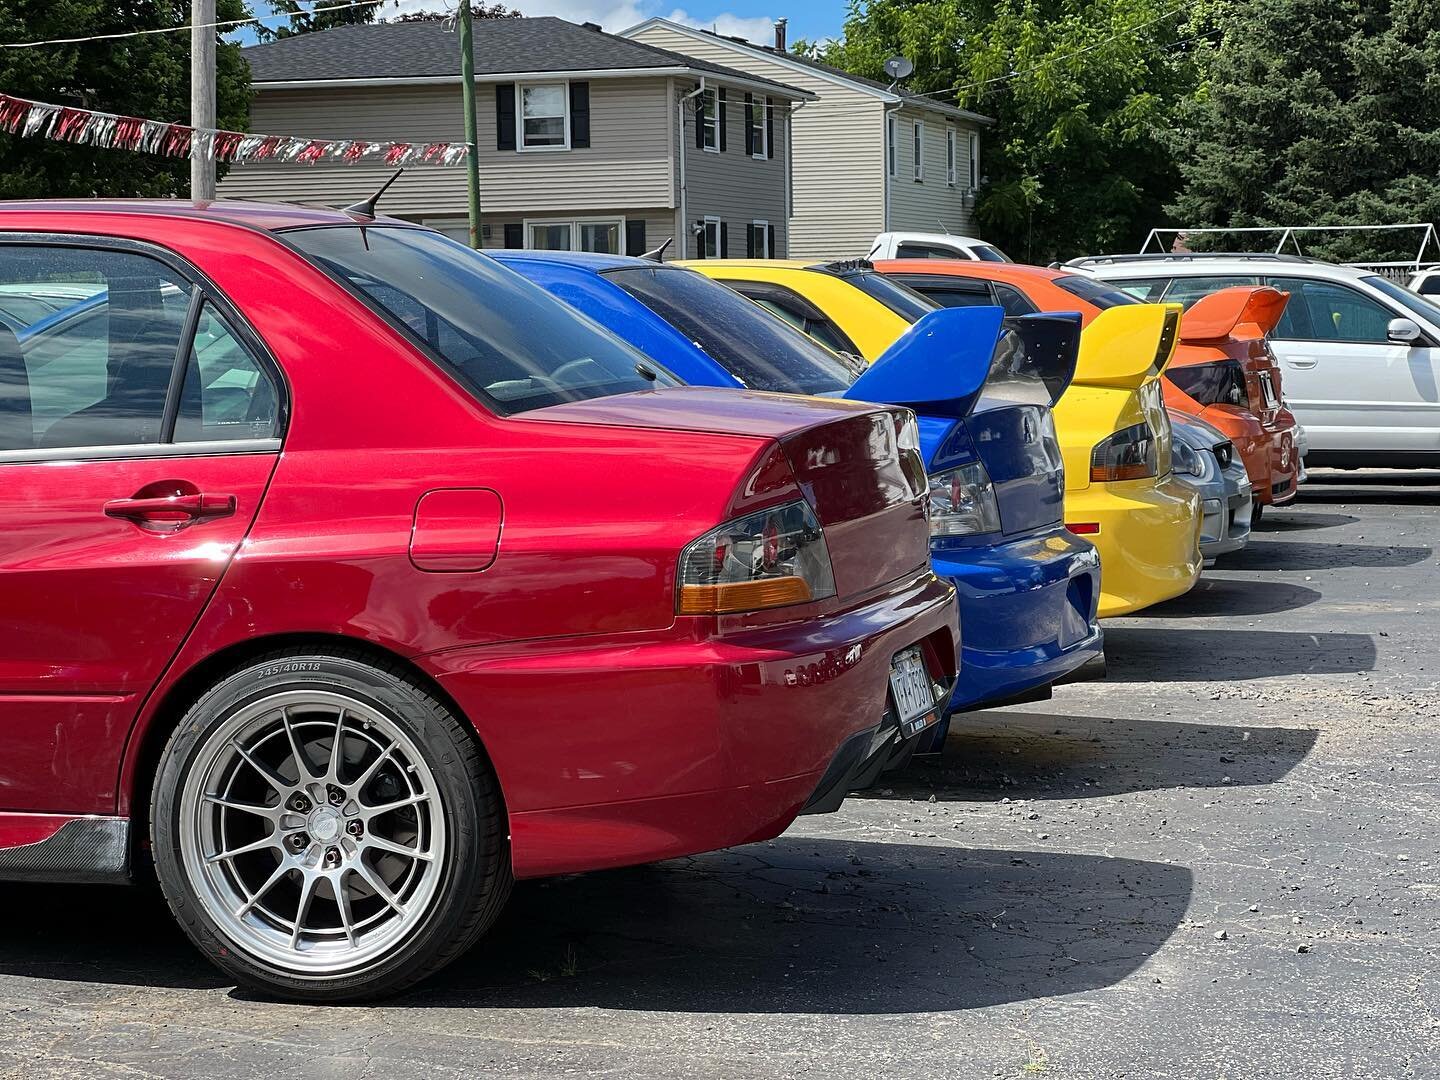 As car enthusiasts we like vehicles that catch our eye. That&rsquo;s why at Dialed In we hand pick our inventory from across the country. Finding exactly what we would want to buy if we were the consumer.. because we were the consumer!